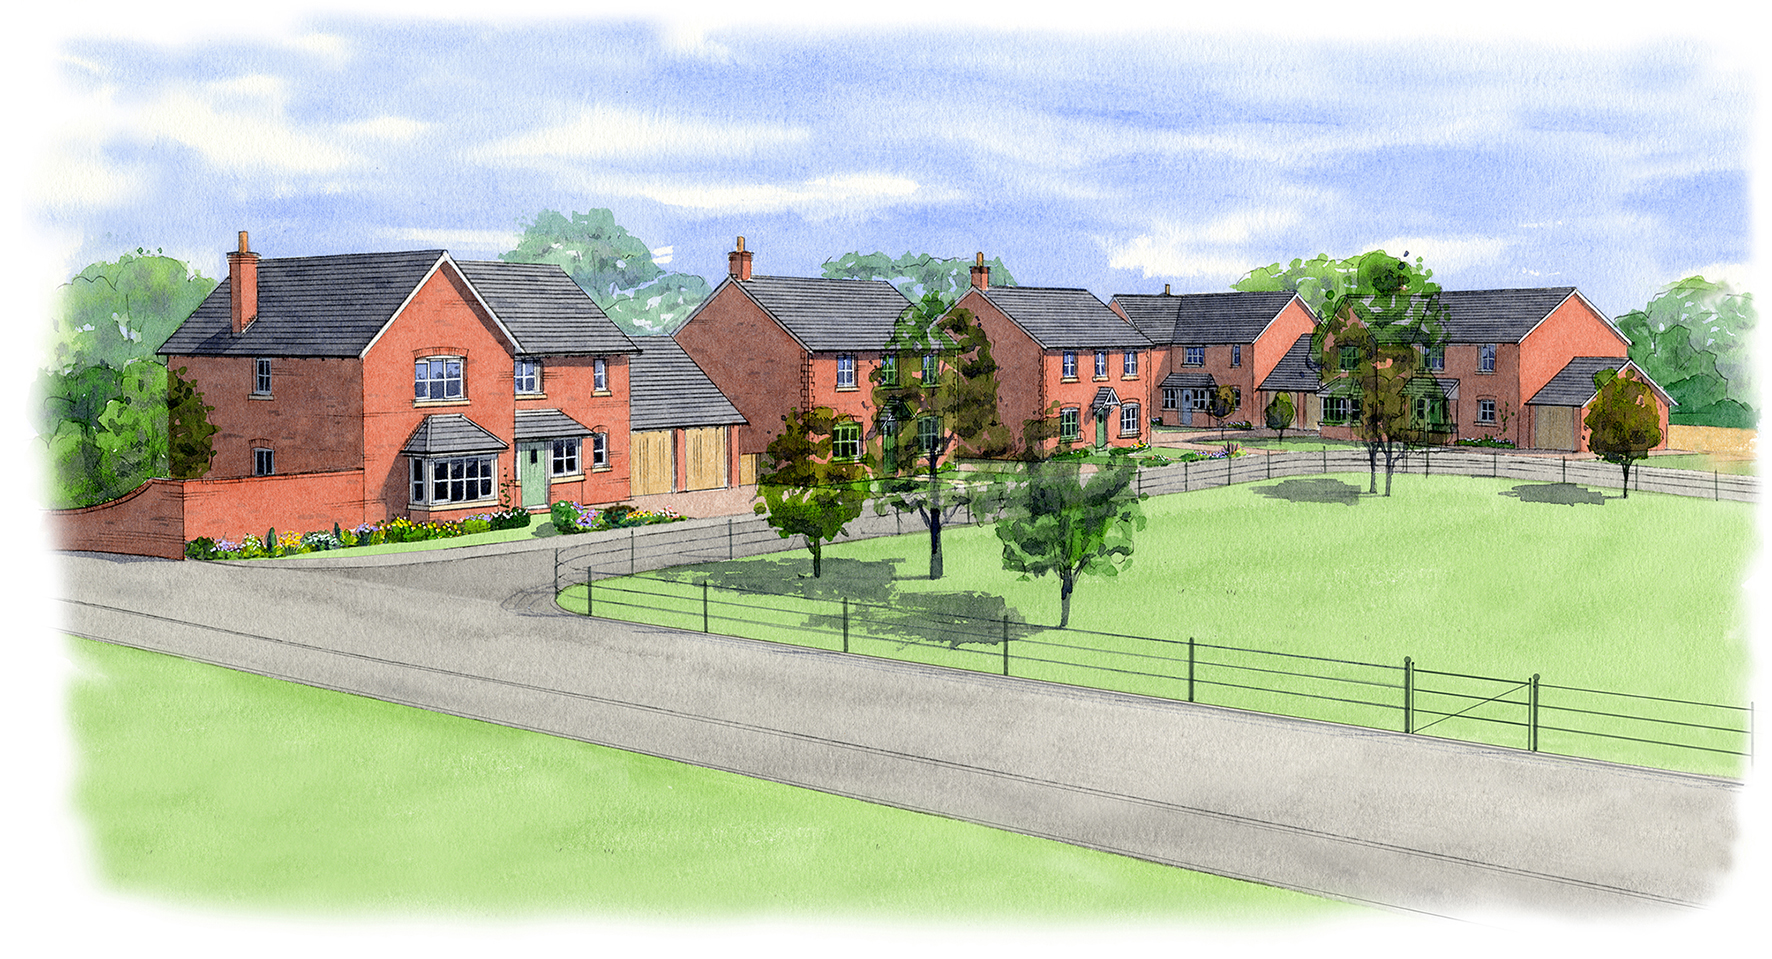 terrace and detached homes for sale Shropshire